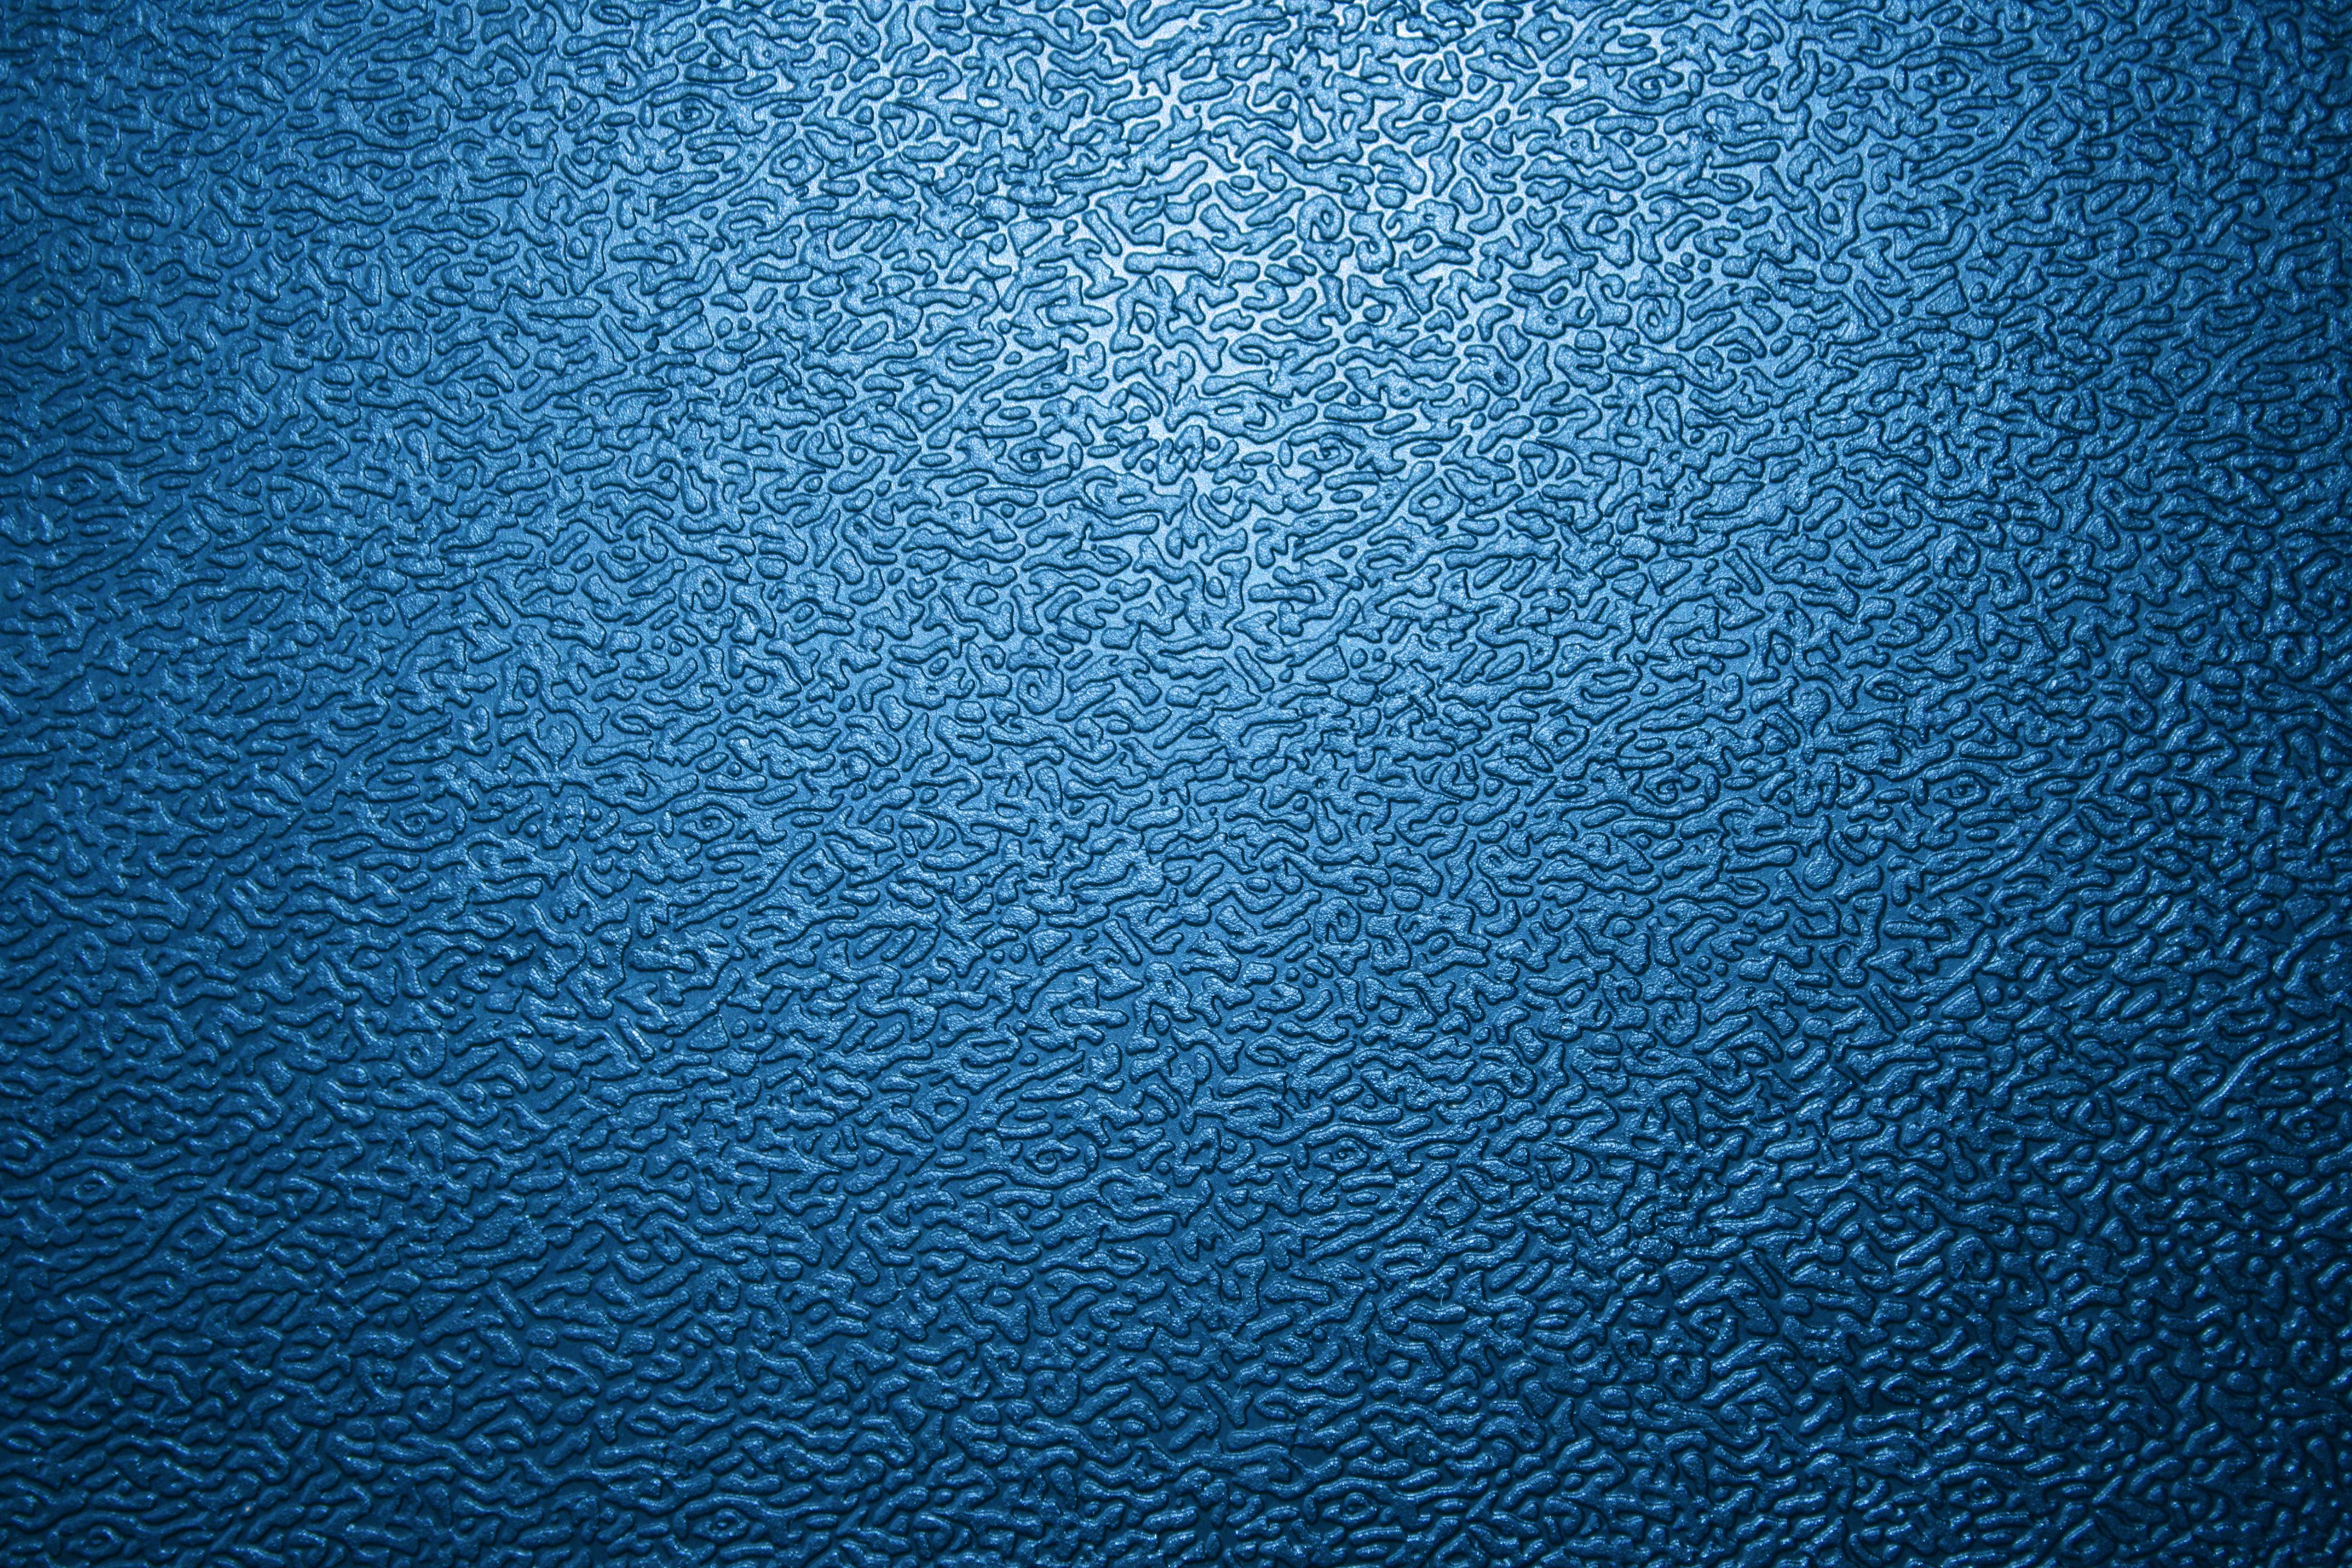 Textured Blue Plastic Close Up Picture | Free Photograph | Photos ...